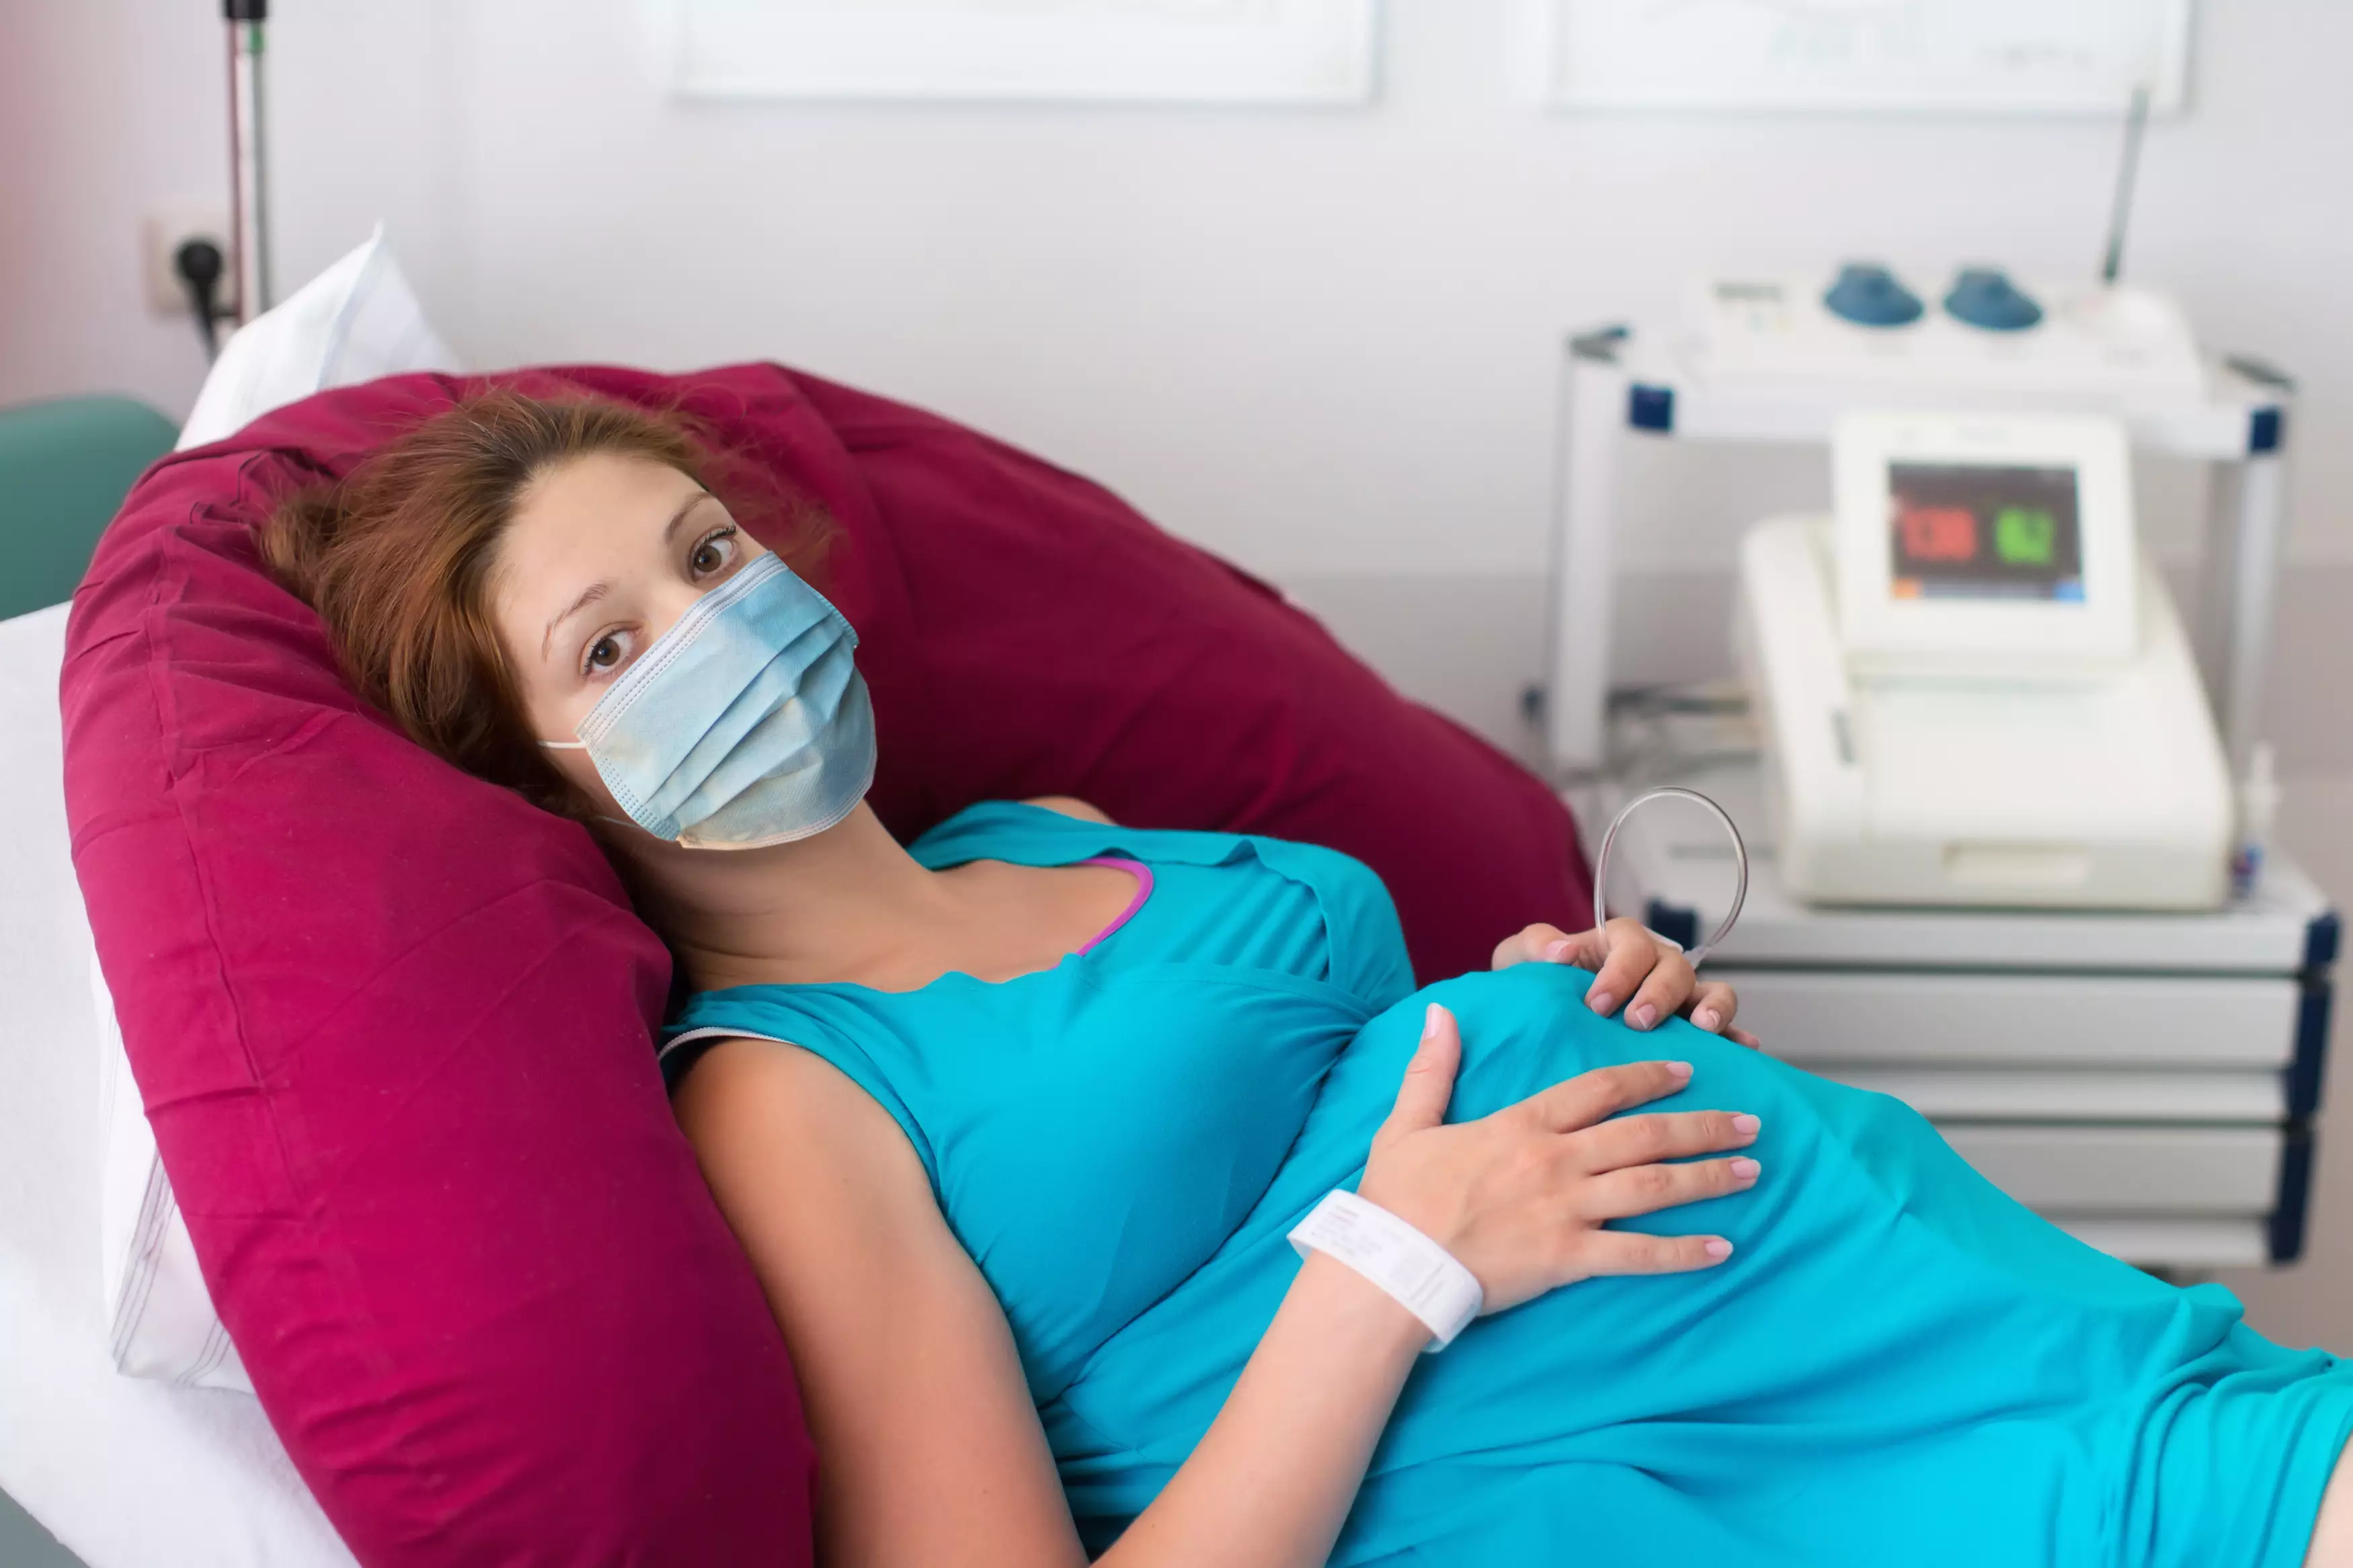 Women are being told they can't even take their masks off in labour (